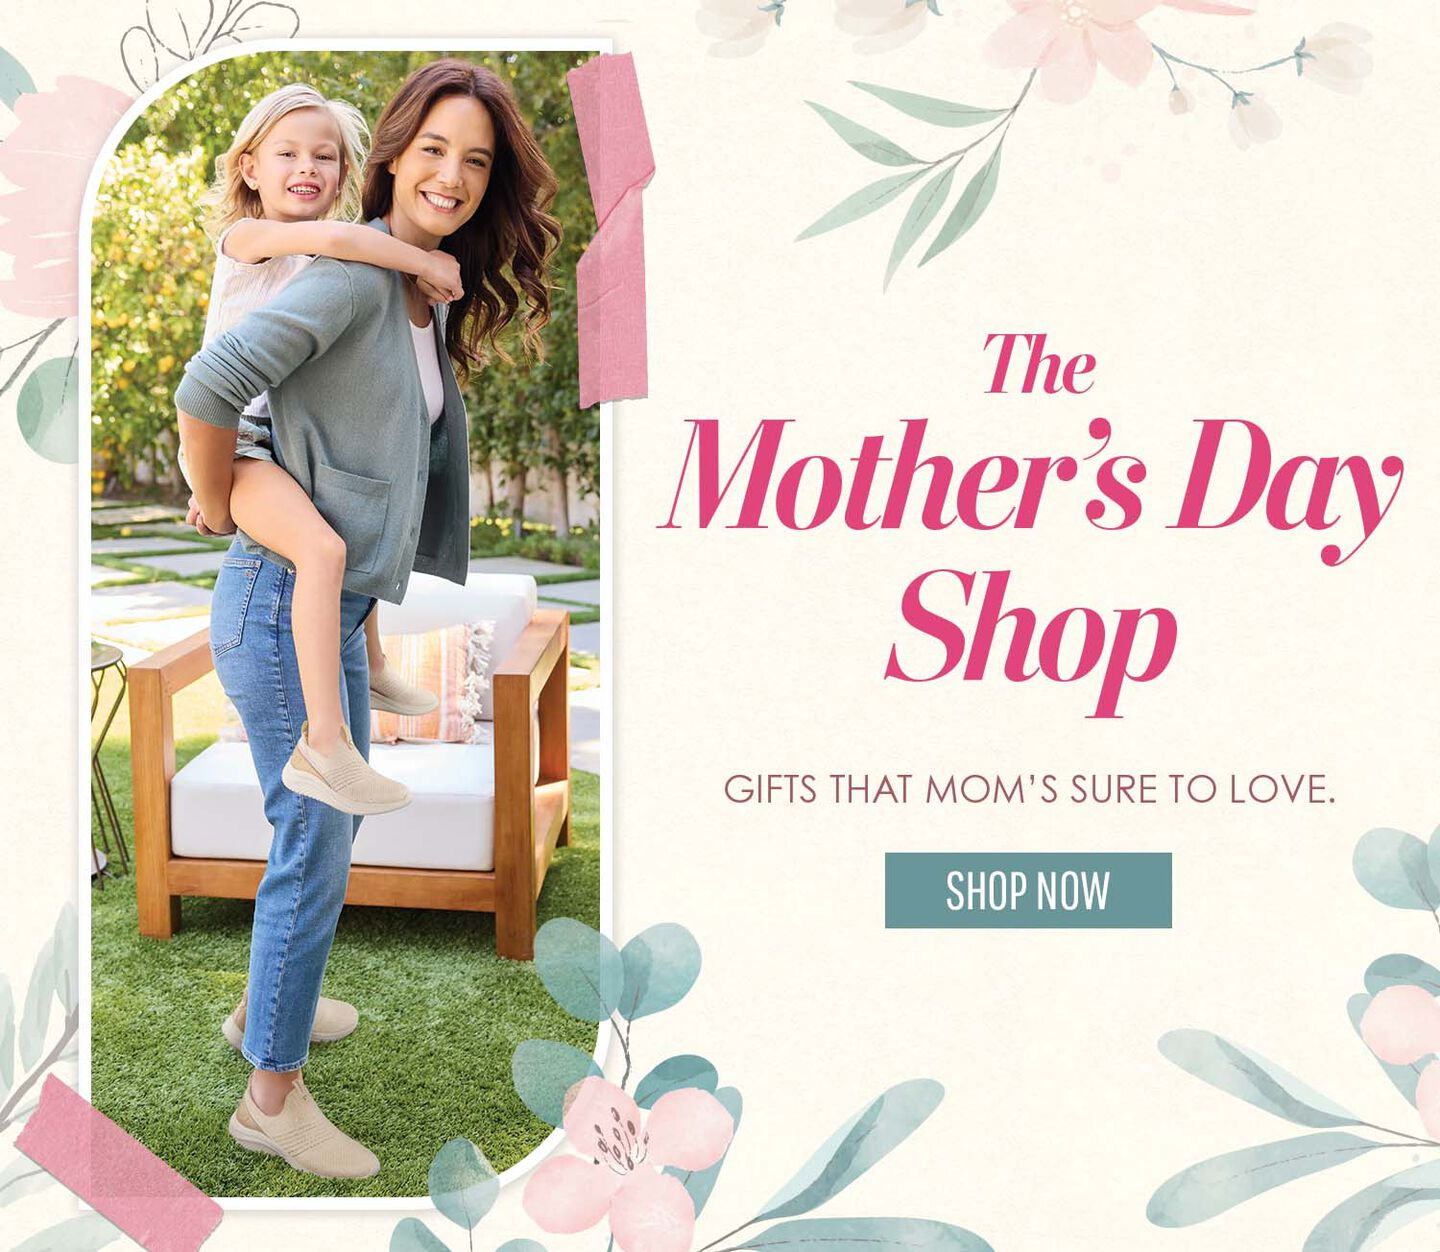 The Mother's Day Shop - GIFTS THAT MOM'S SURE TO LOVE ~ SHOP NOW